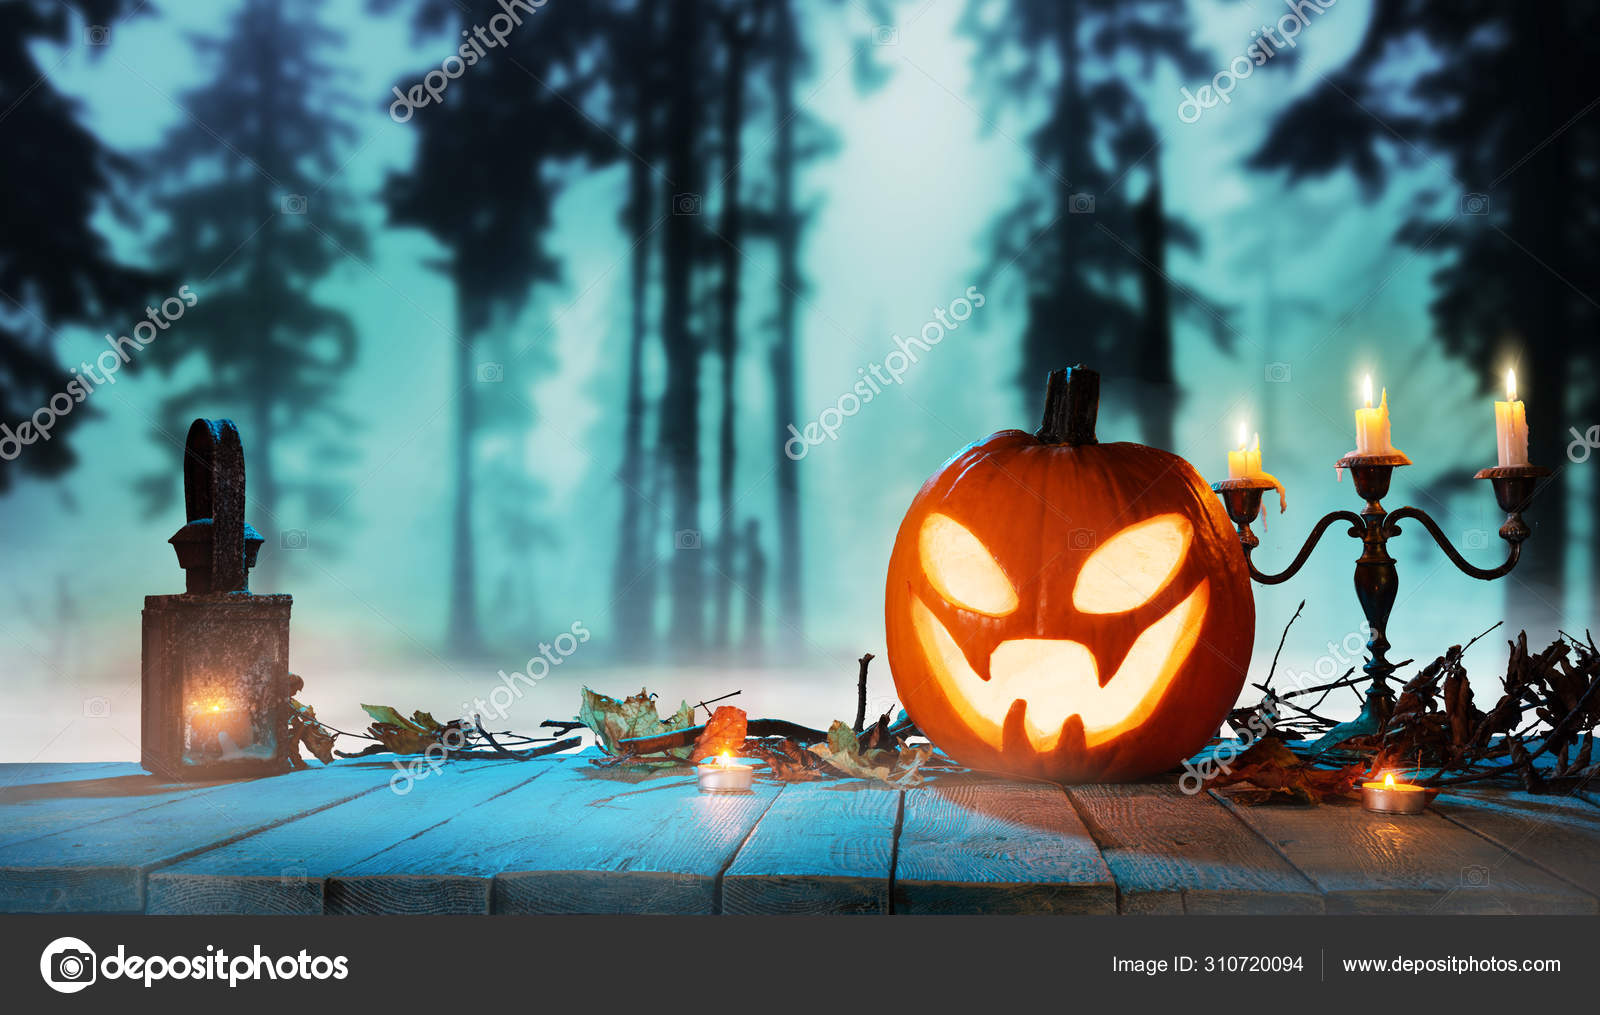 Spooky halloween pumpkin in forest Stock Photo by ©jag_cz 310720094